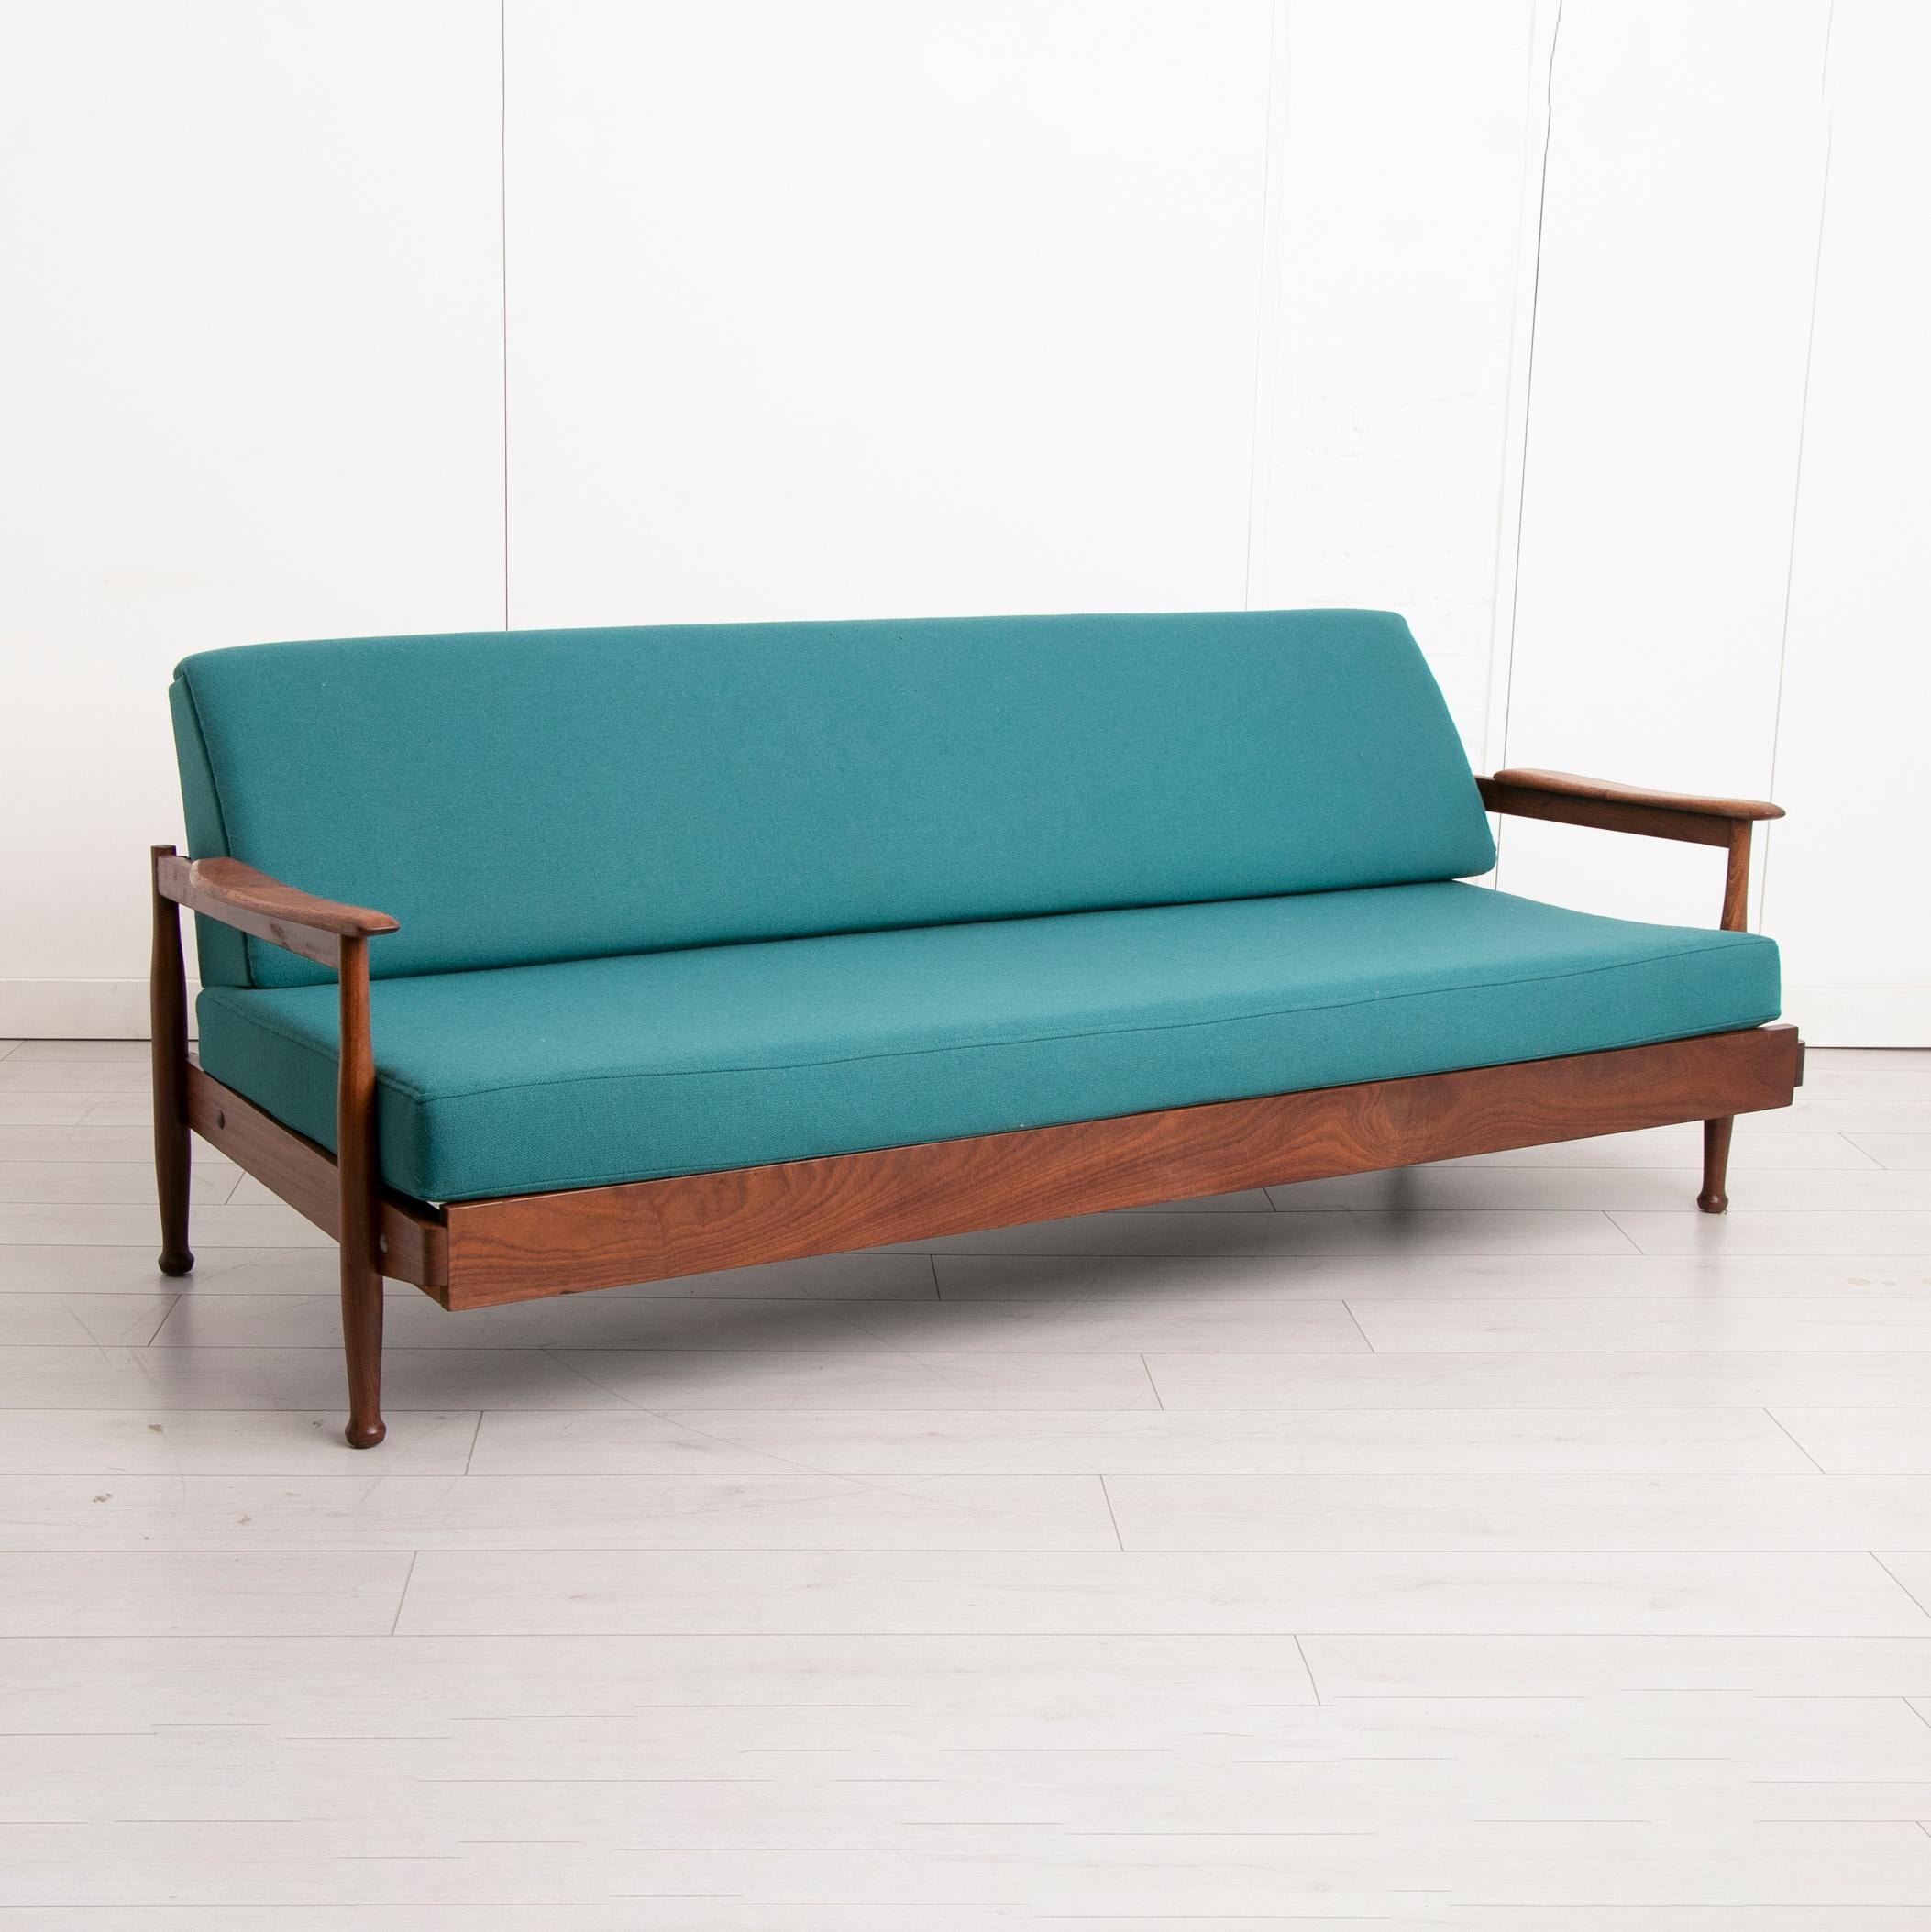 A mid century teak and afrormosia day bed by Guy Rogers newly reupholstered in teal fabric.

Dimensions: 201 W x 90 D x 76 H cm
Seat height: 41 cm.